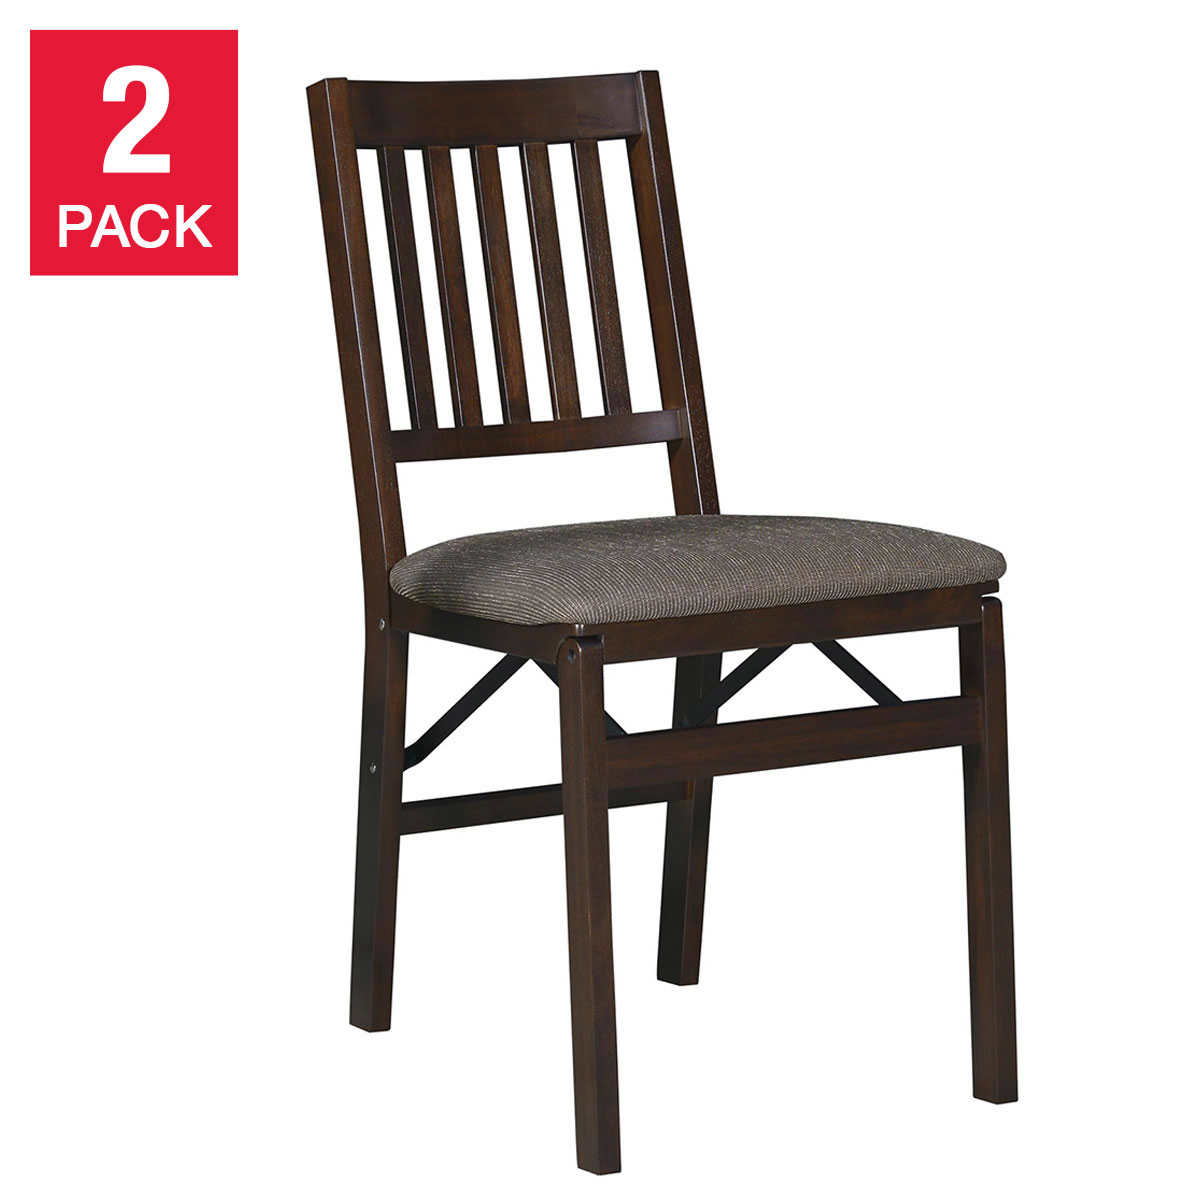 stakmore wood folding chair with upholstered seat espresso 2pack